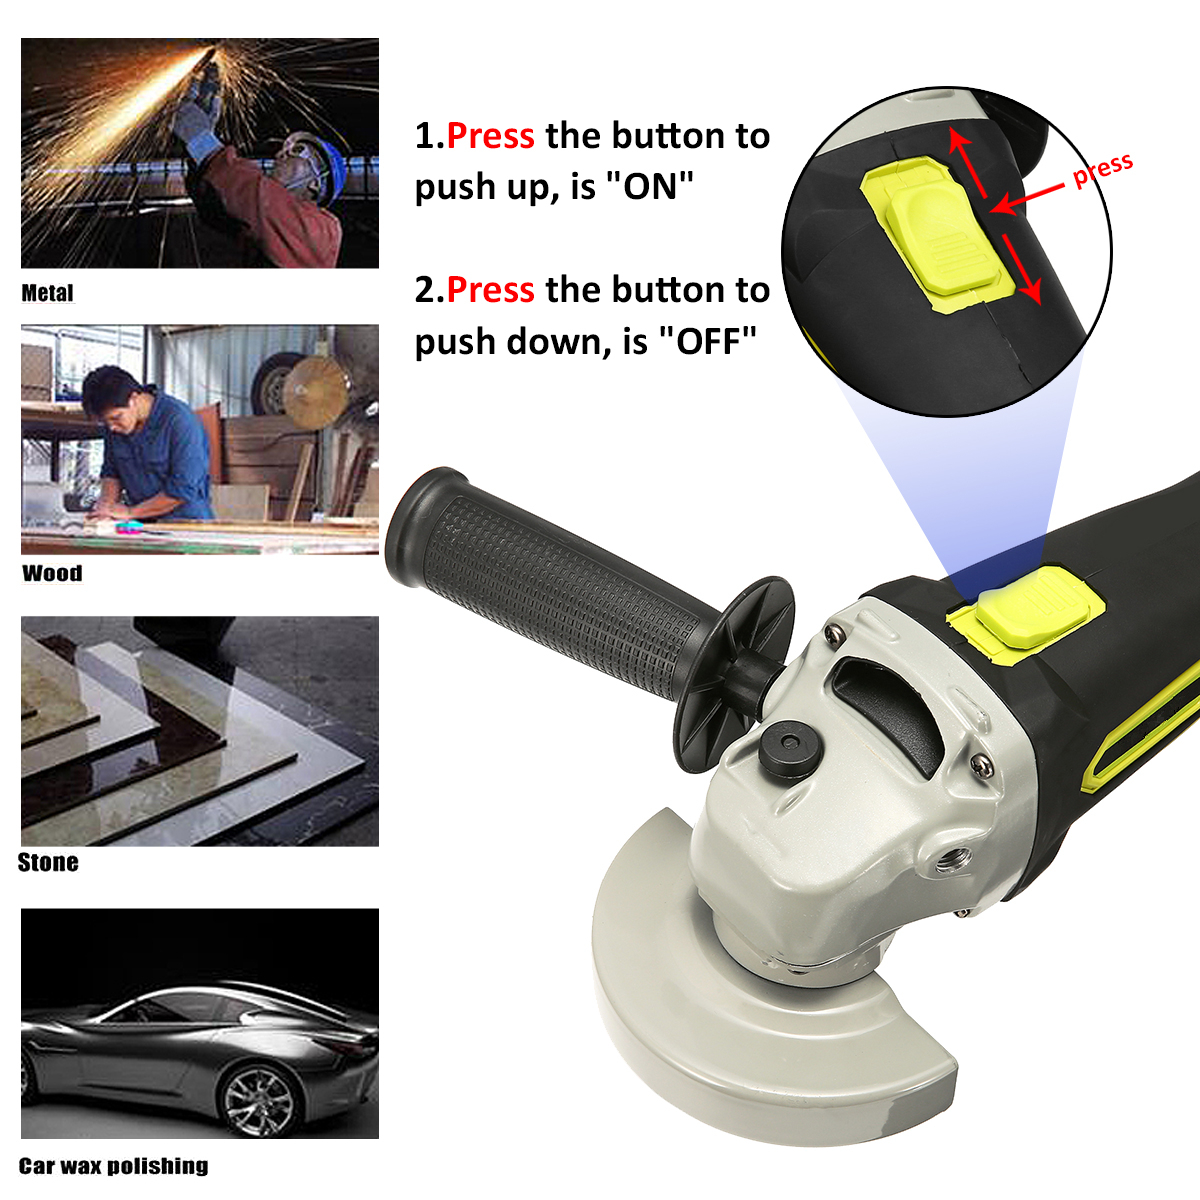 128VF-19800mAh-Lithium-Ion-Brushless-Cut-Off-Angle-Grinder-Cordless-Electric-Angle-Grinder-Power-Cut-1397283-7